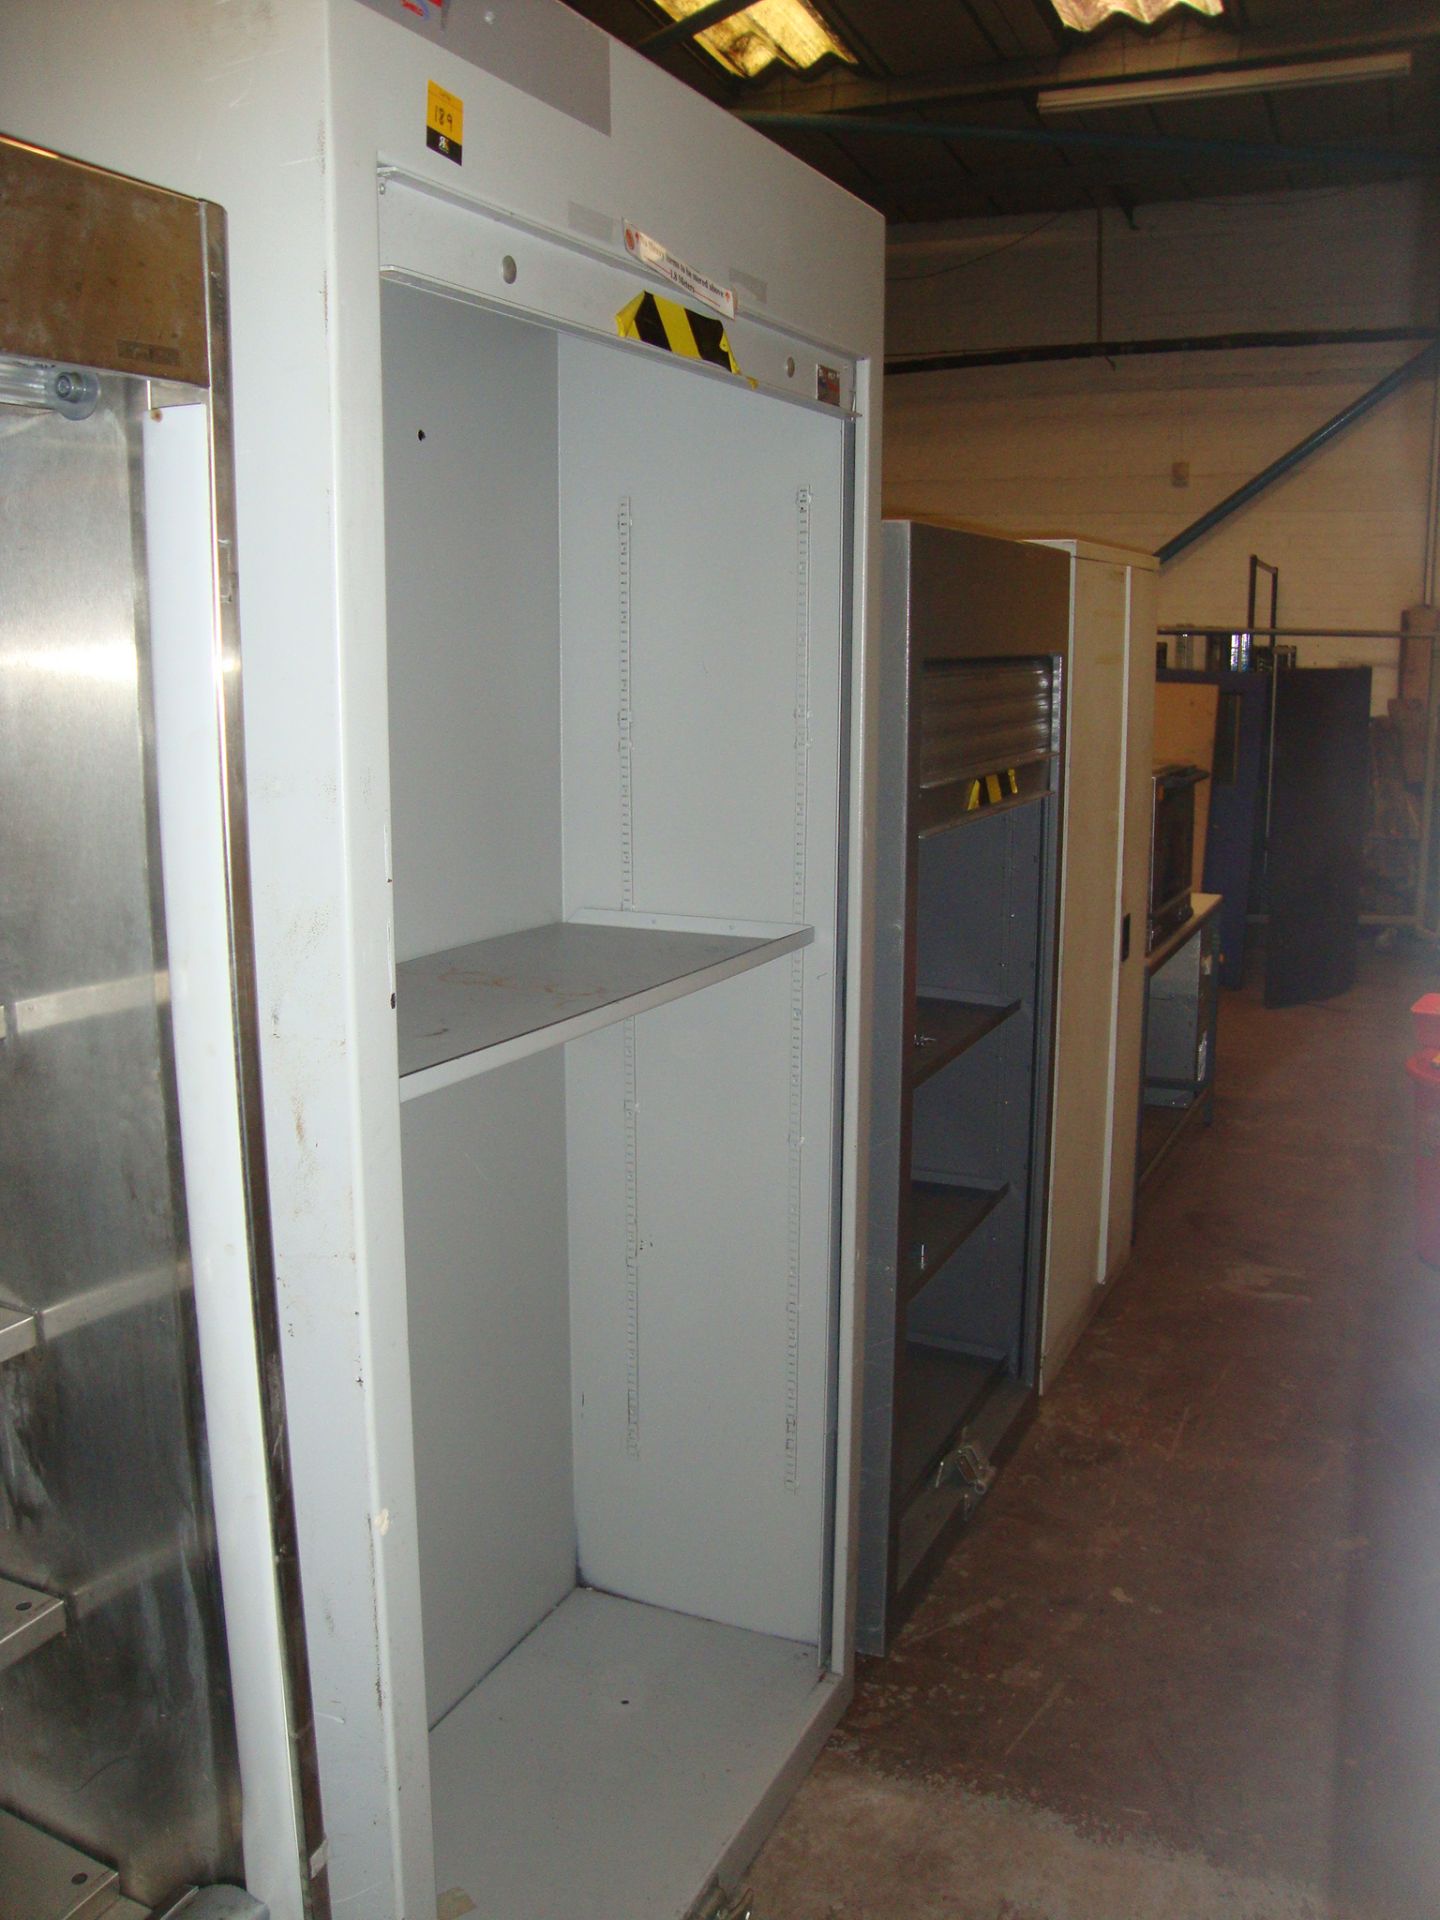 3 off assorted cabinets, 2 of which are security cabinets with the ability to attach hasps/padlocks.